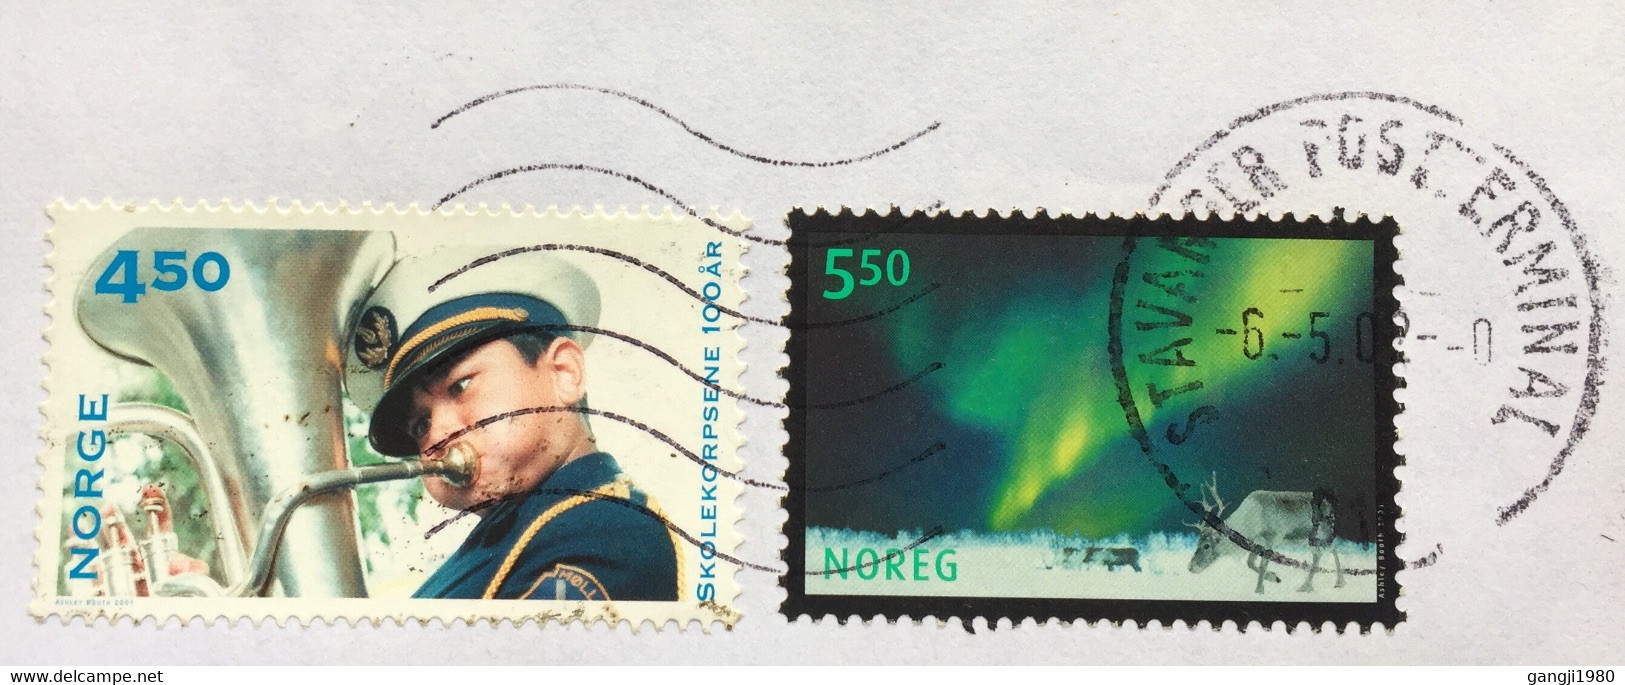 NORWAY 2002, USED AIRMAIL COVER TO INDIA,2 STAMPS ,MUSIC,ANIMAL,NATURE STAVANGER CANCELLATION - Lettres & Documents